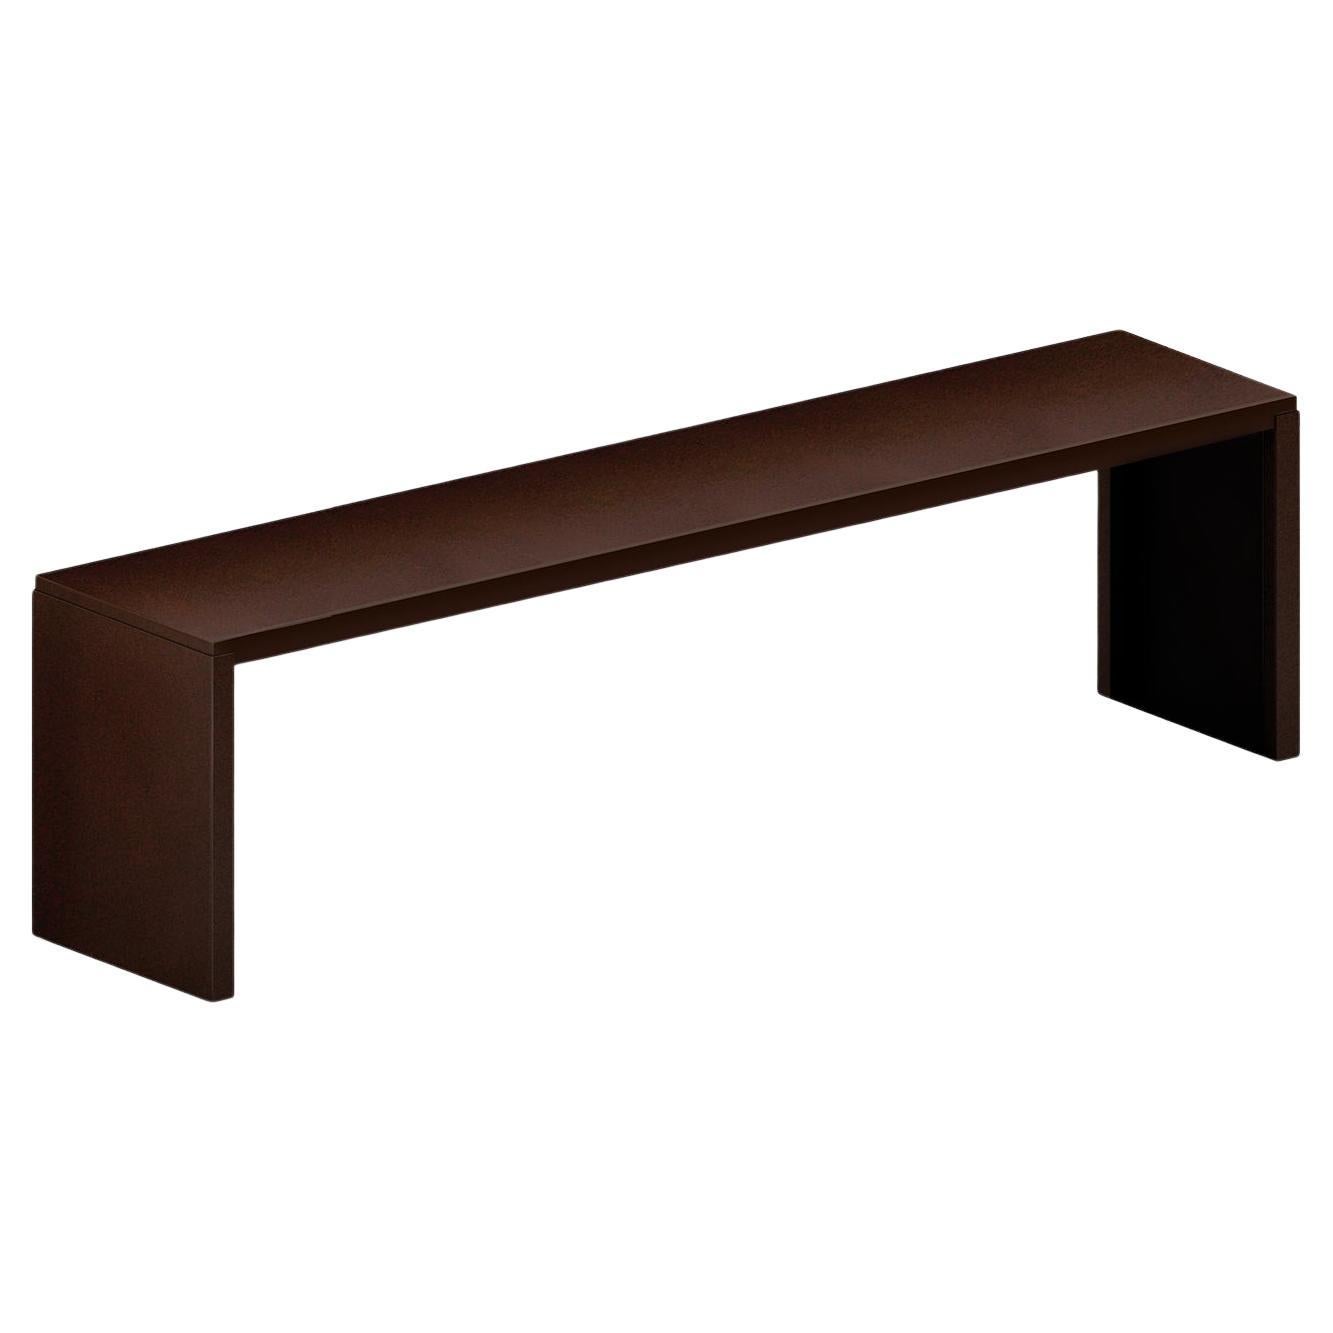 Big Irony Brown Outdoor Bench by Maurizio Peregalli